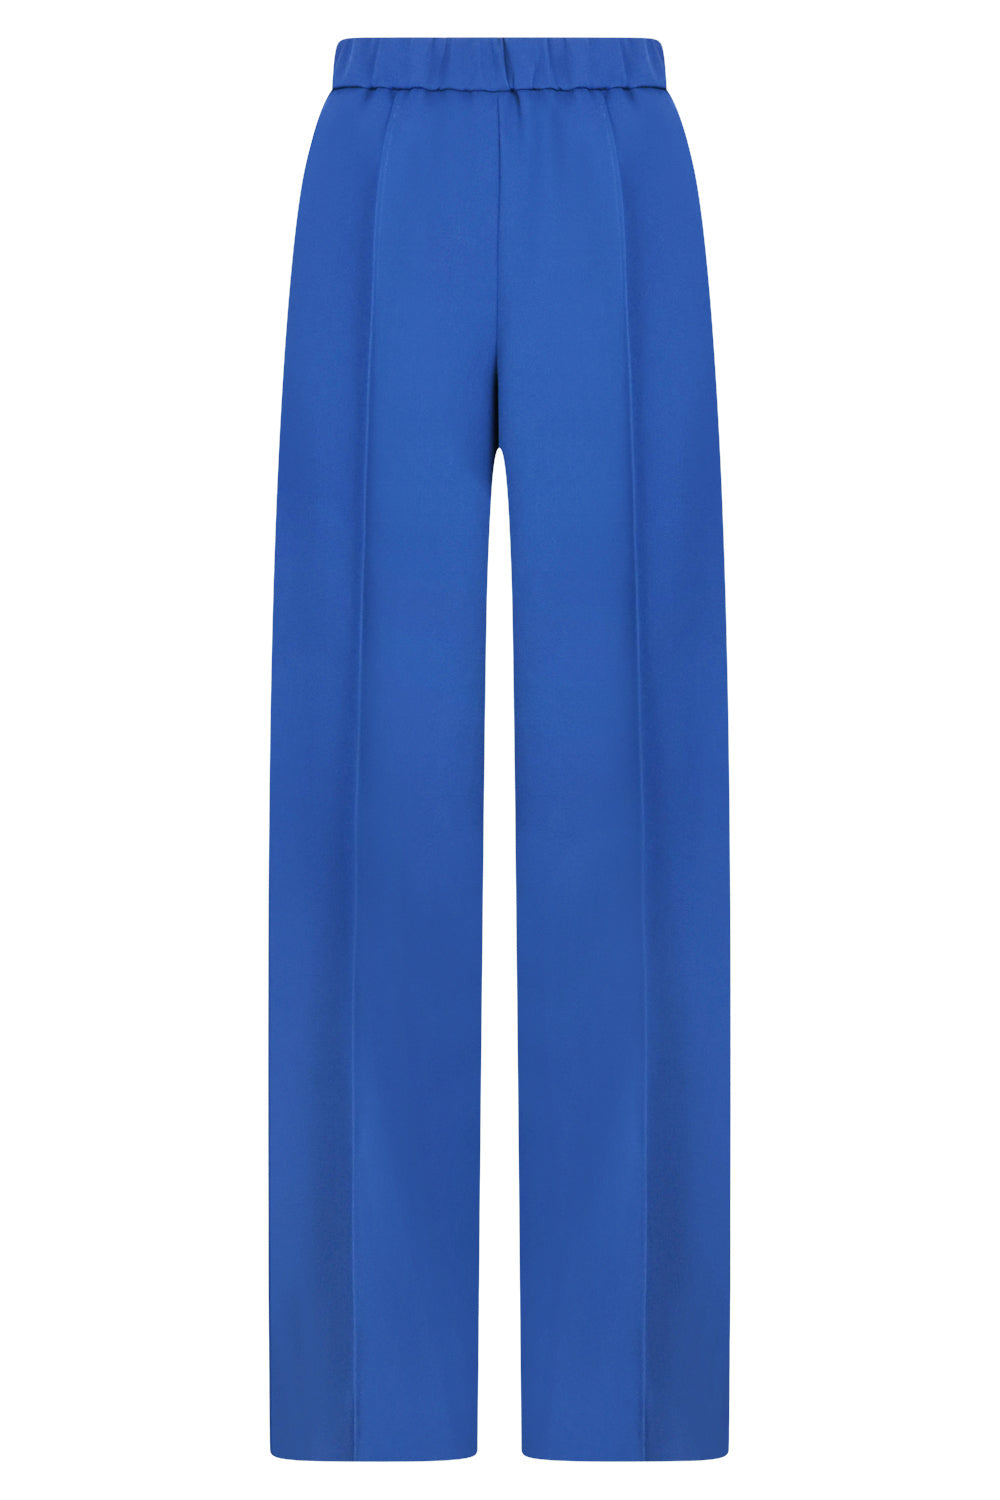 Tailored Trousers - Women's Clothing Online Made in Italy